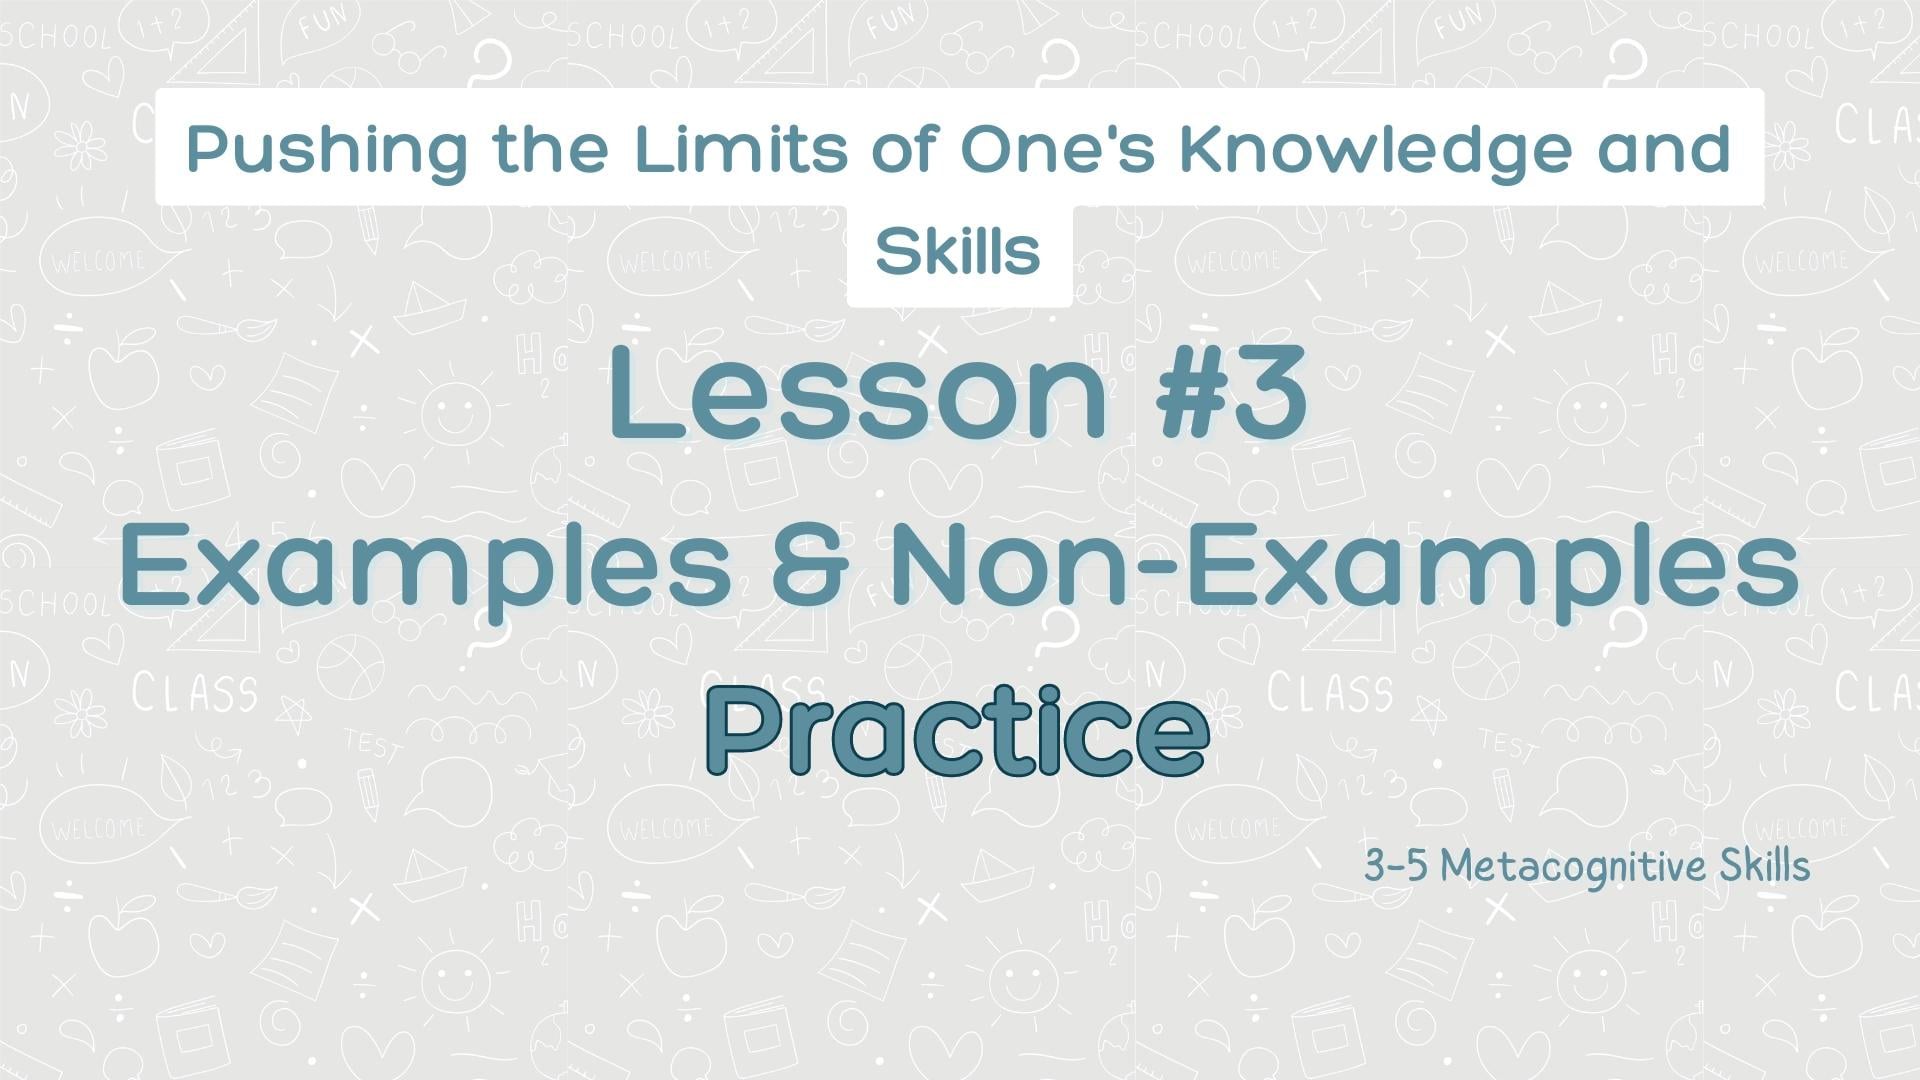 Lesson #3 Examples & Non-Examples video thumbnail